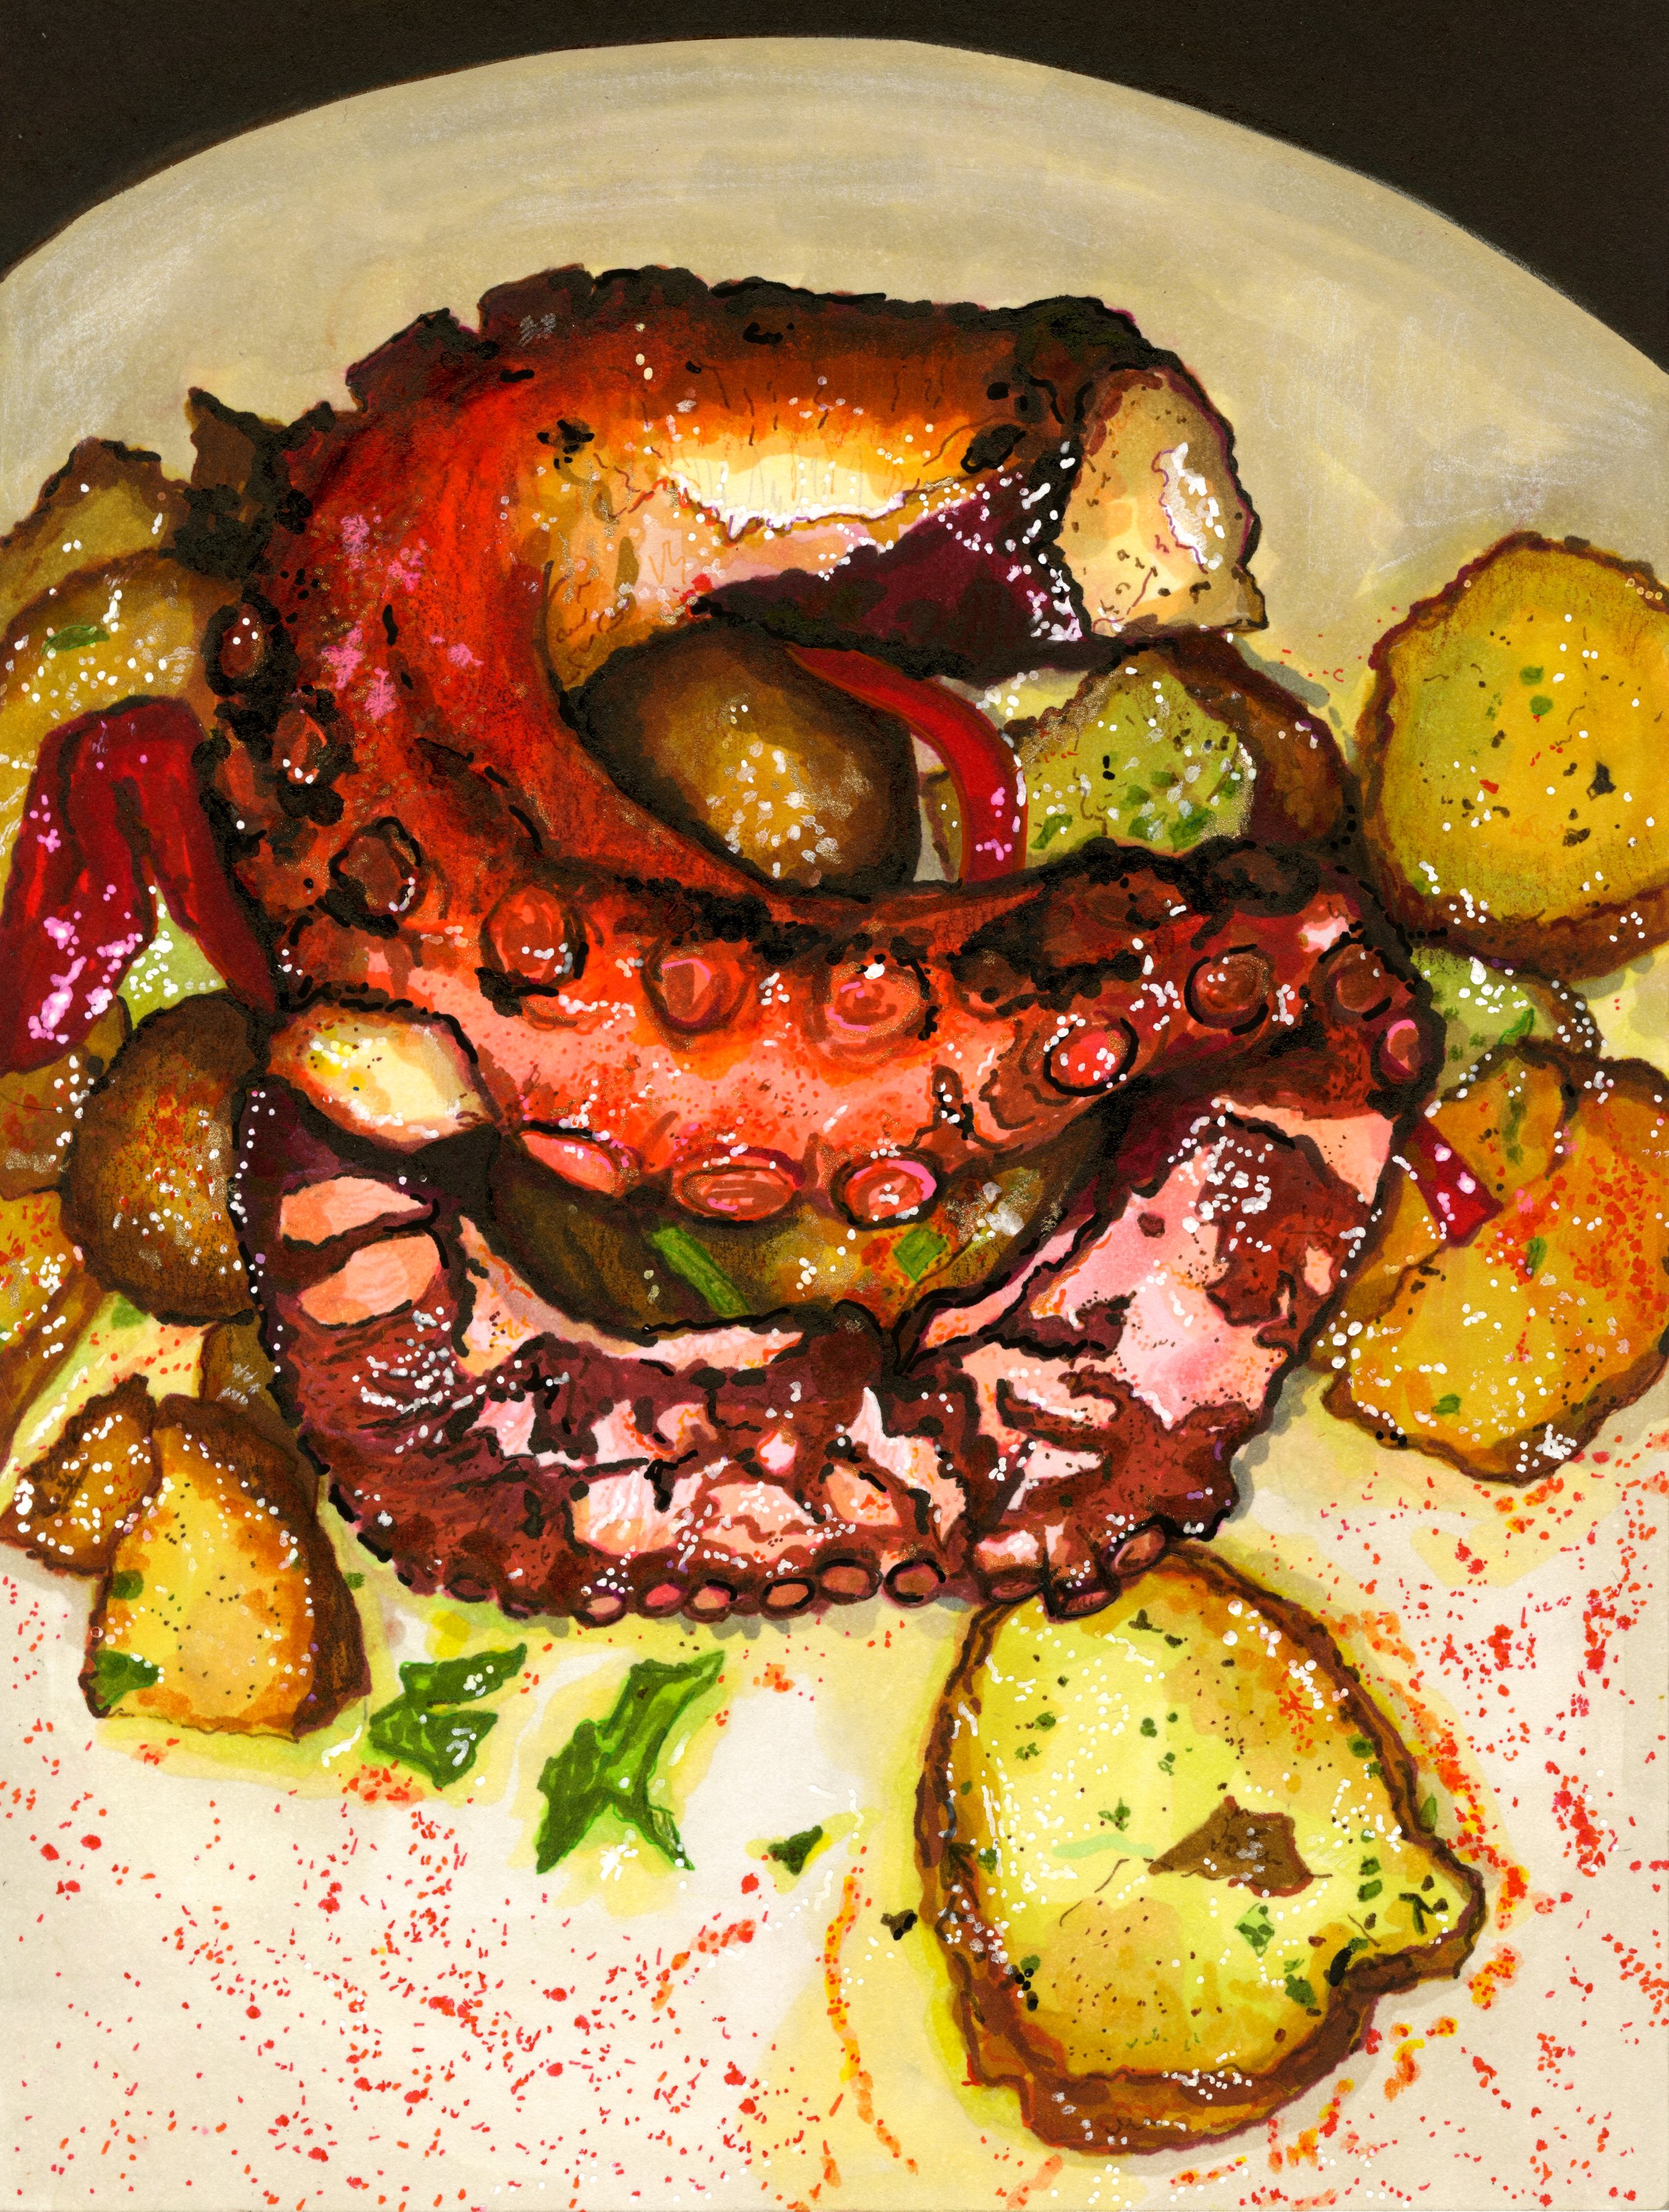 Our Big Night Out (Pulpo)